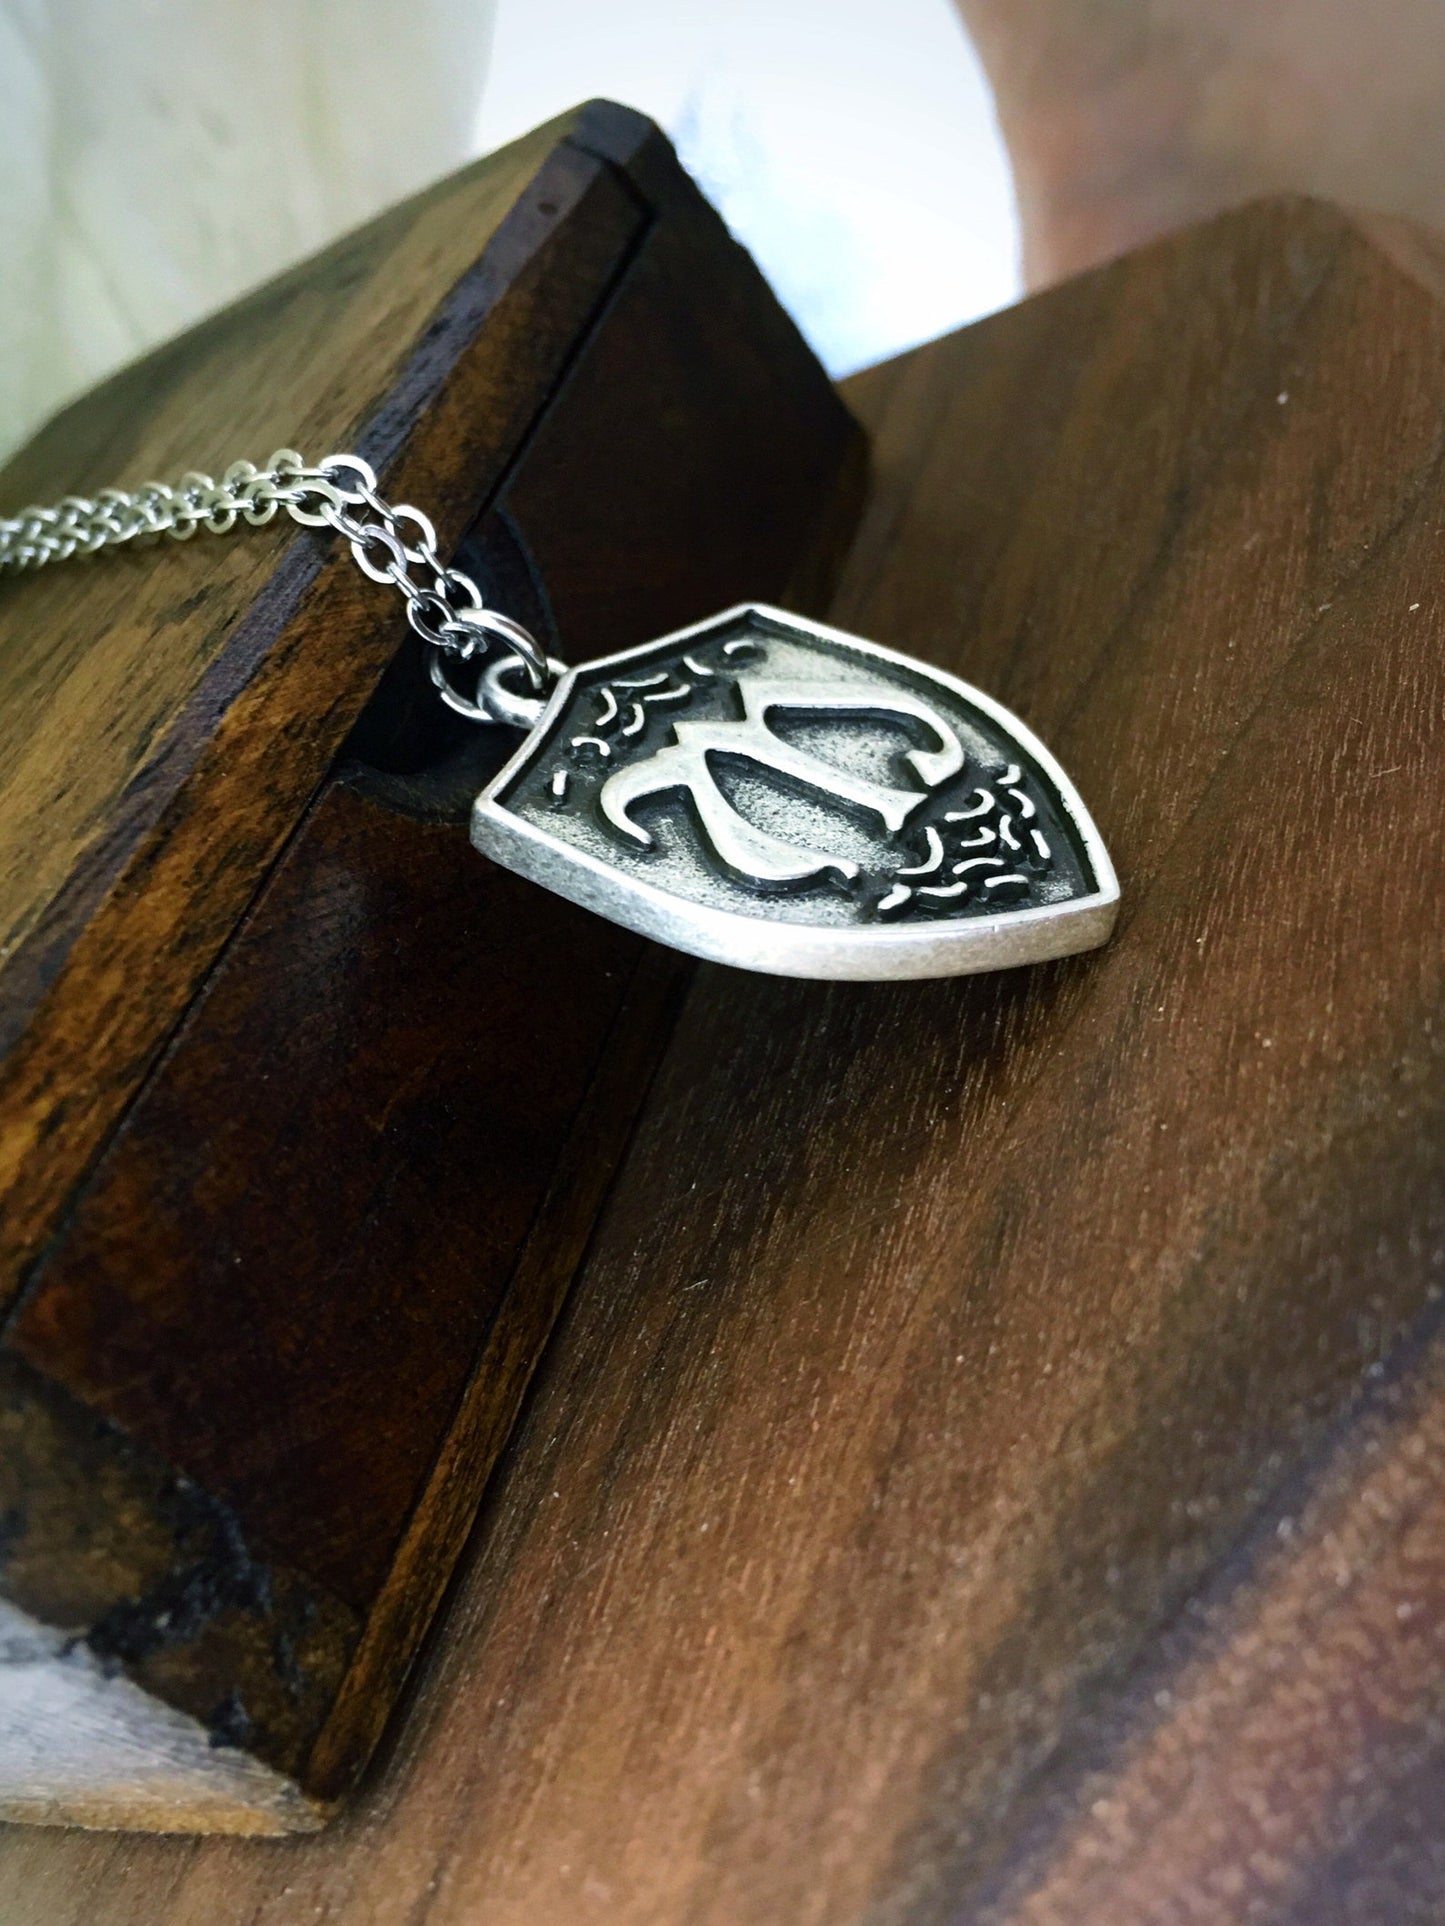 Hope Mikaelson Necklace - Family Crest